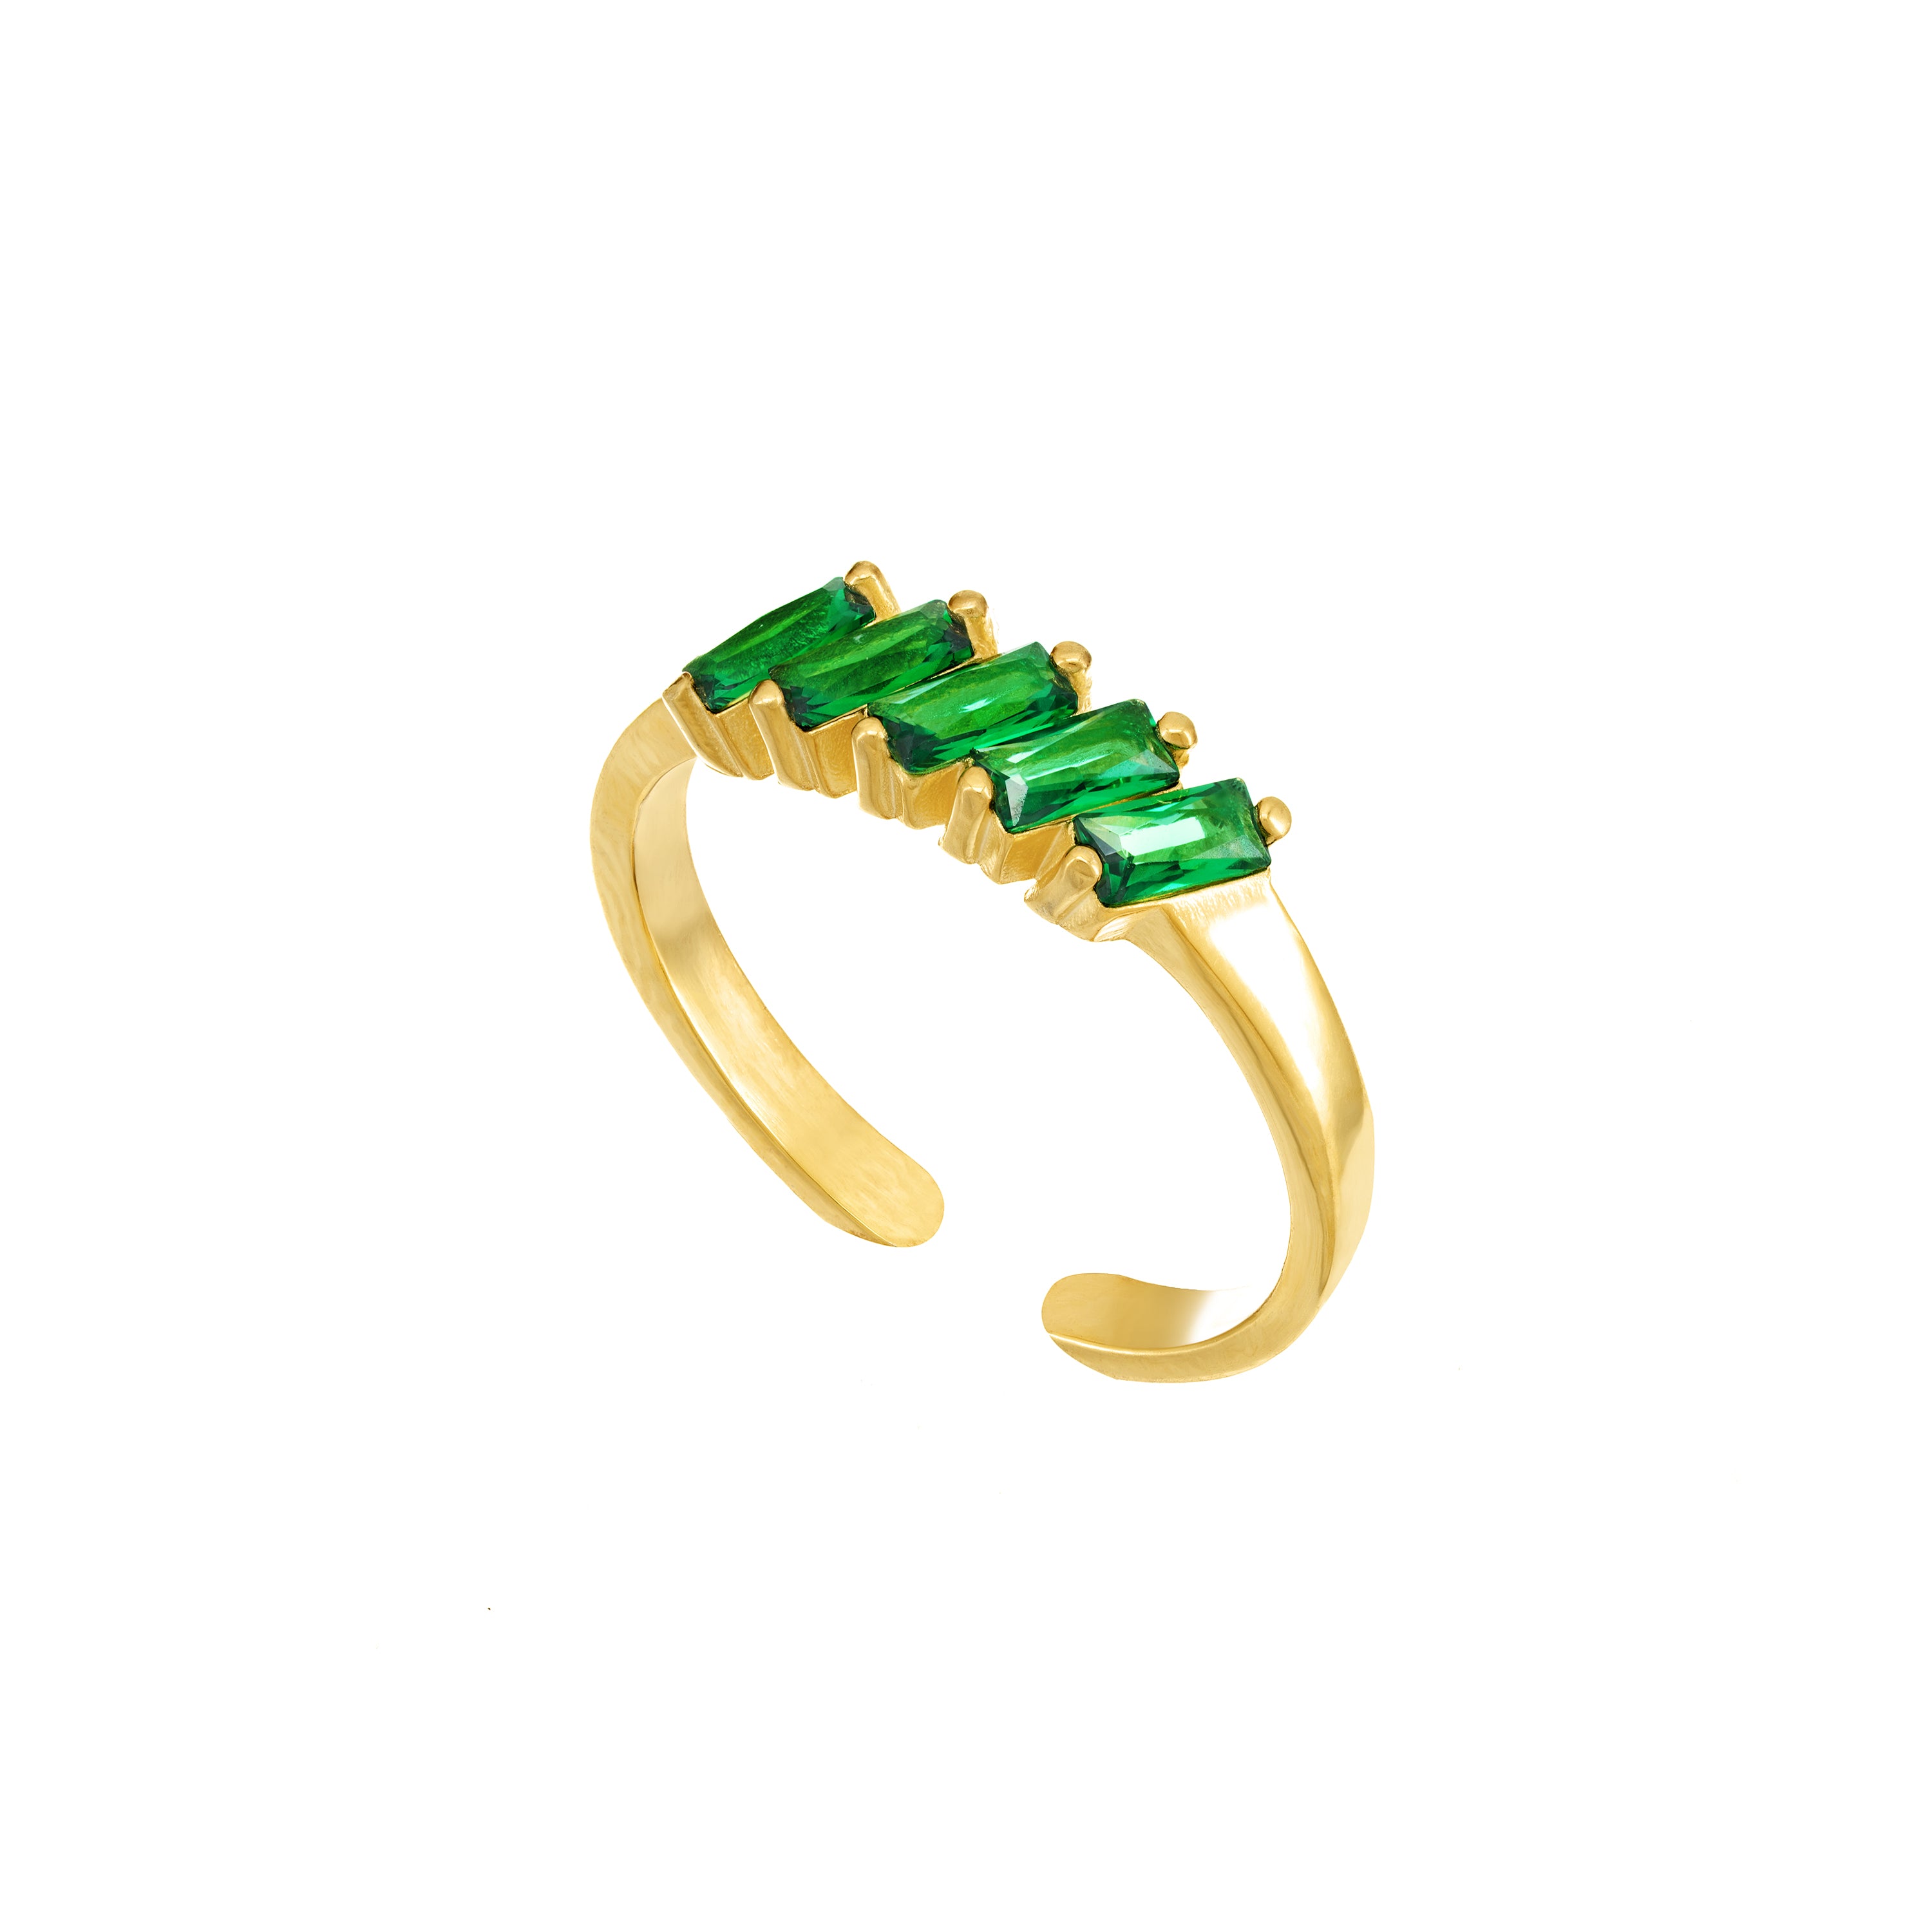 Five Baguette Inclined Ring